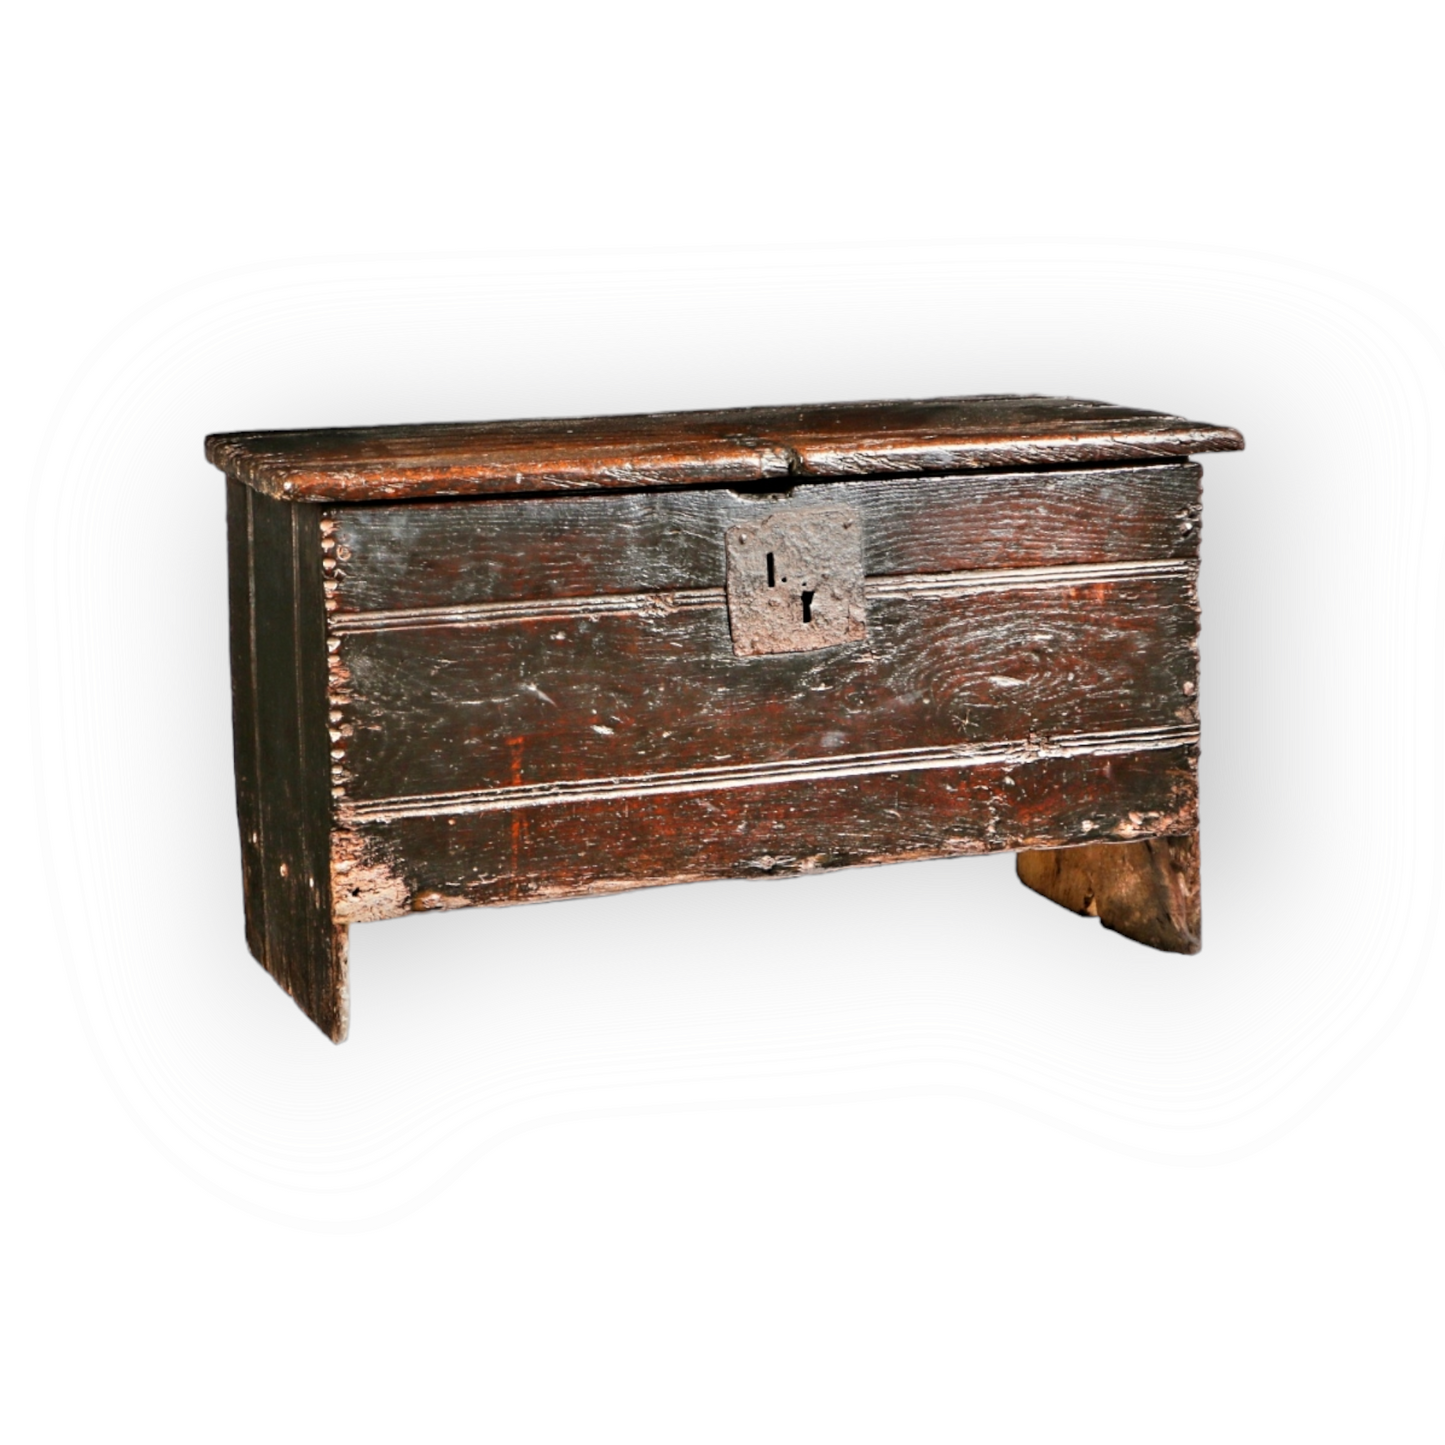 An Early 17th-century Elizabeth I /James I Welsh Antique Oak Boarded Chest or Coffer, circa 1600-1620